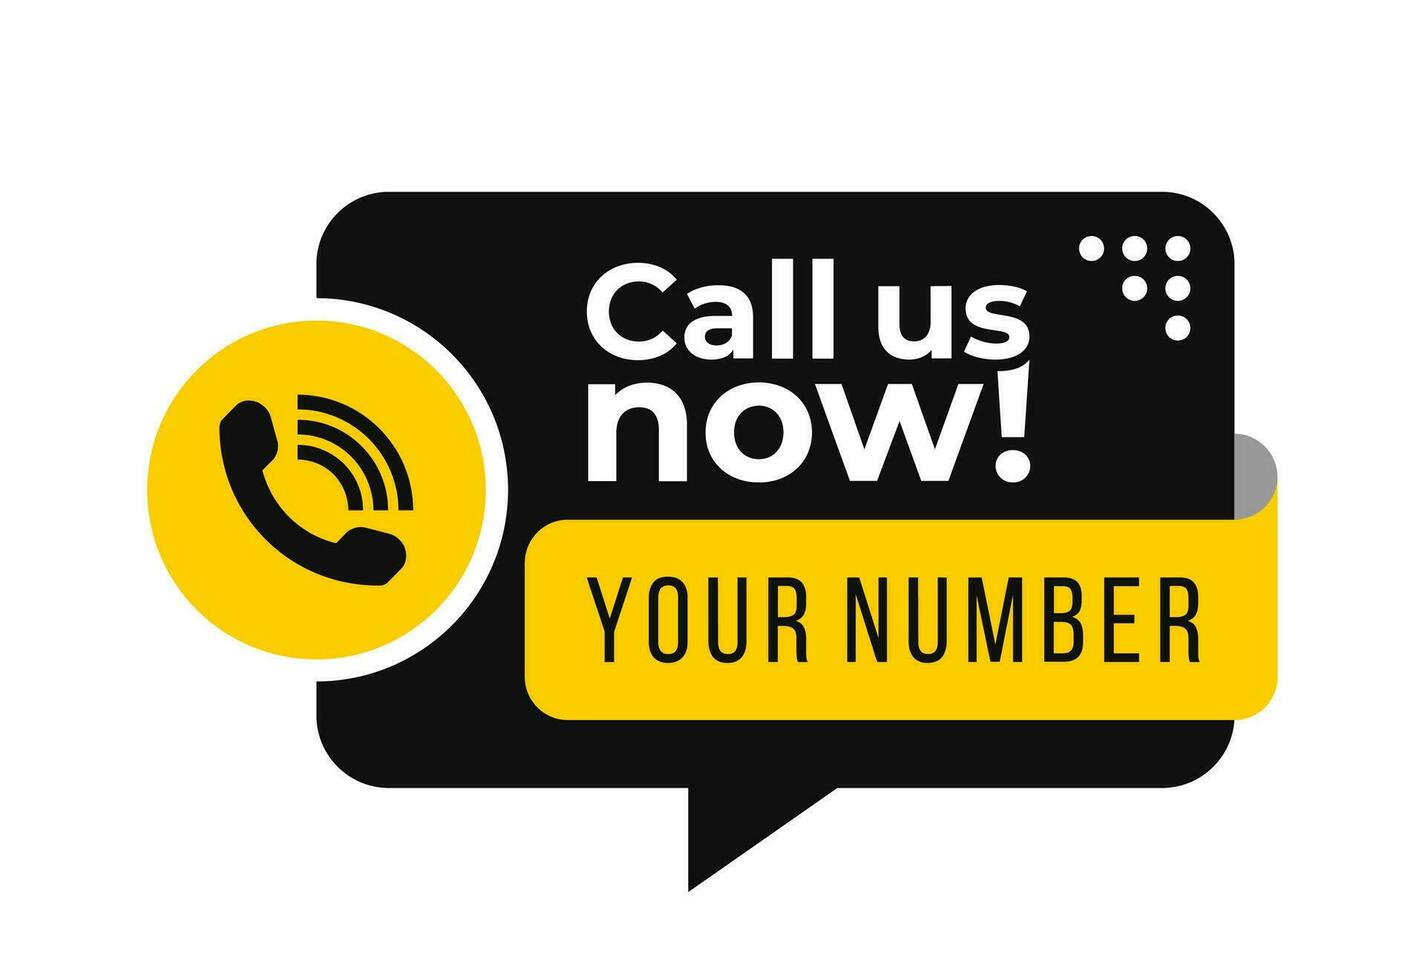 Call us now icons vector. Black and yellow color speech bubble. Template for phone number, sign, button, contact details. Vector illustration